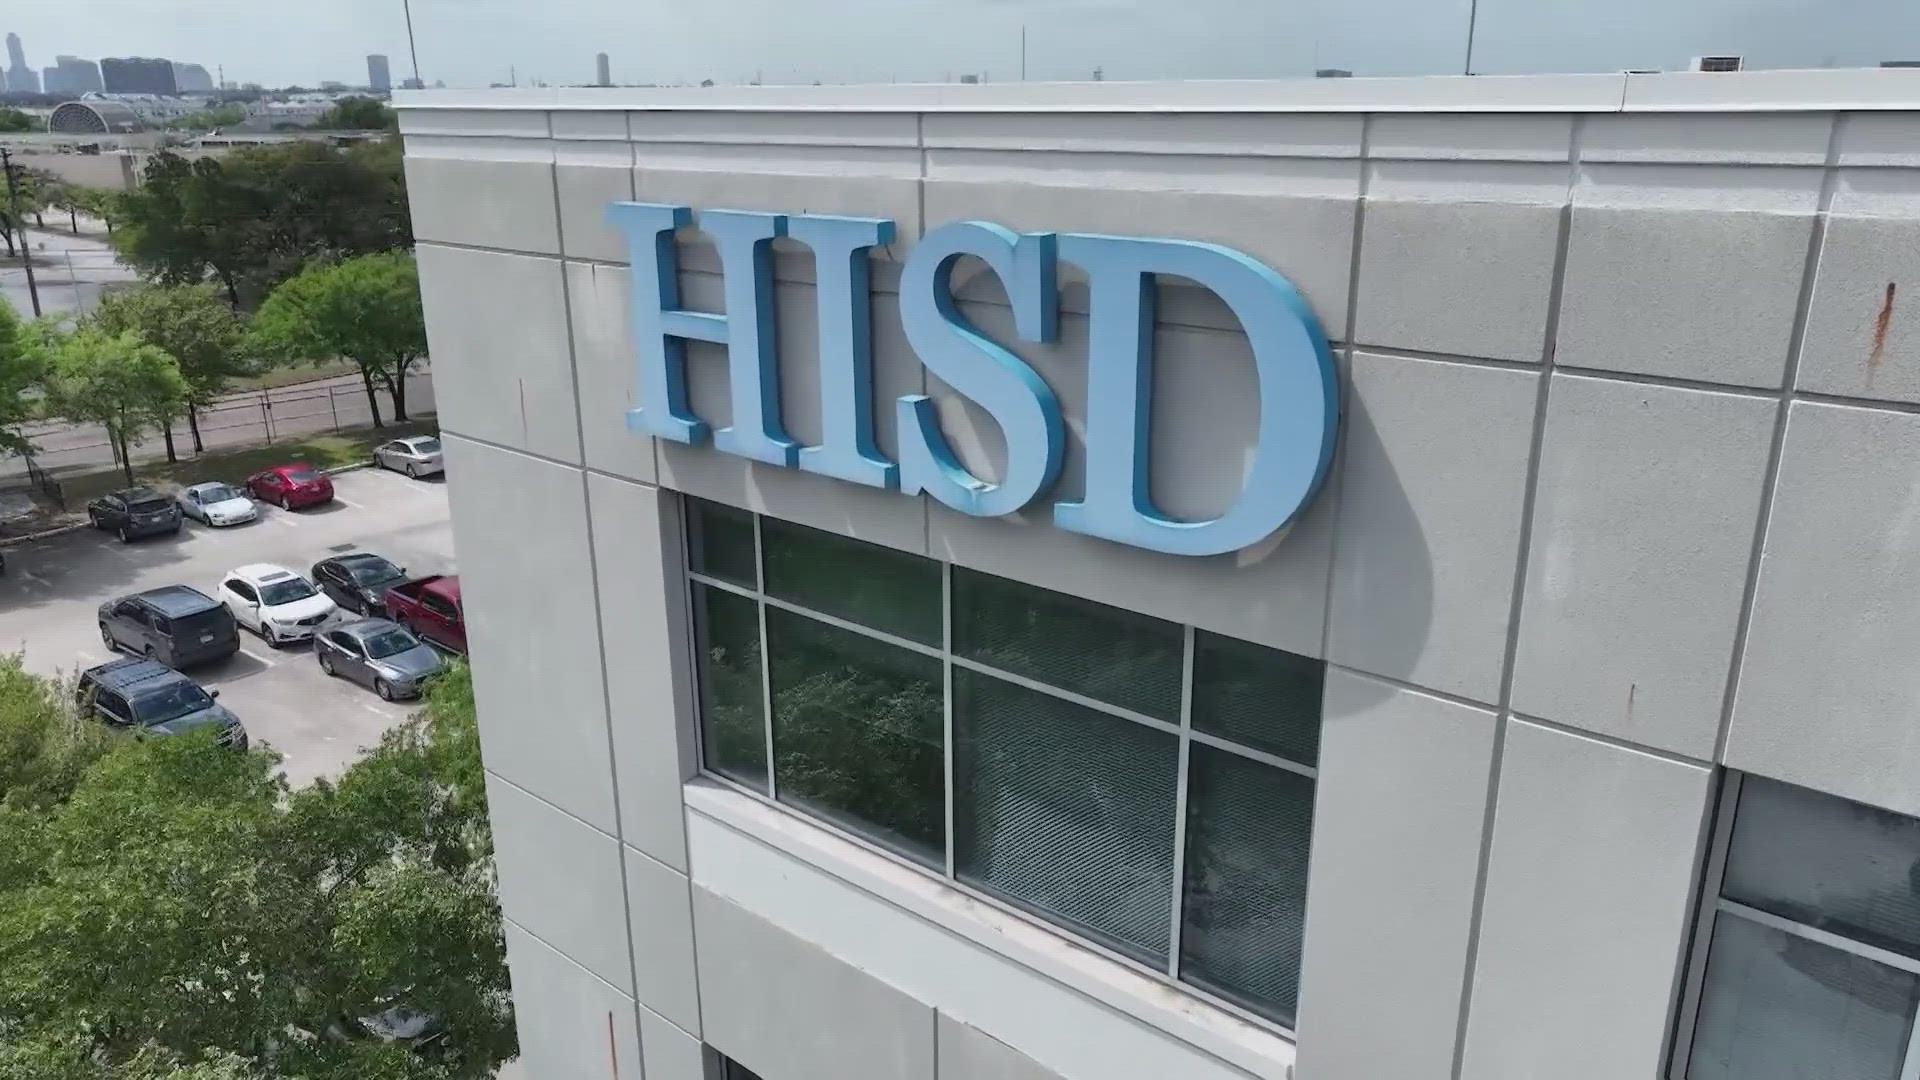 HISD said if teachers at the NES schools choose not to apply or are not chosen for the position, they will be offered a different position within the district.